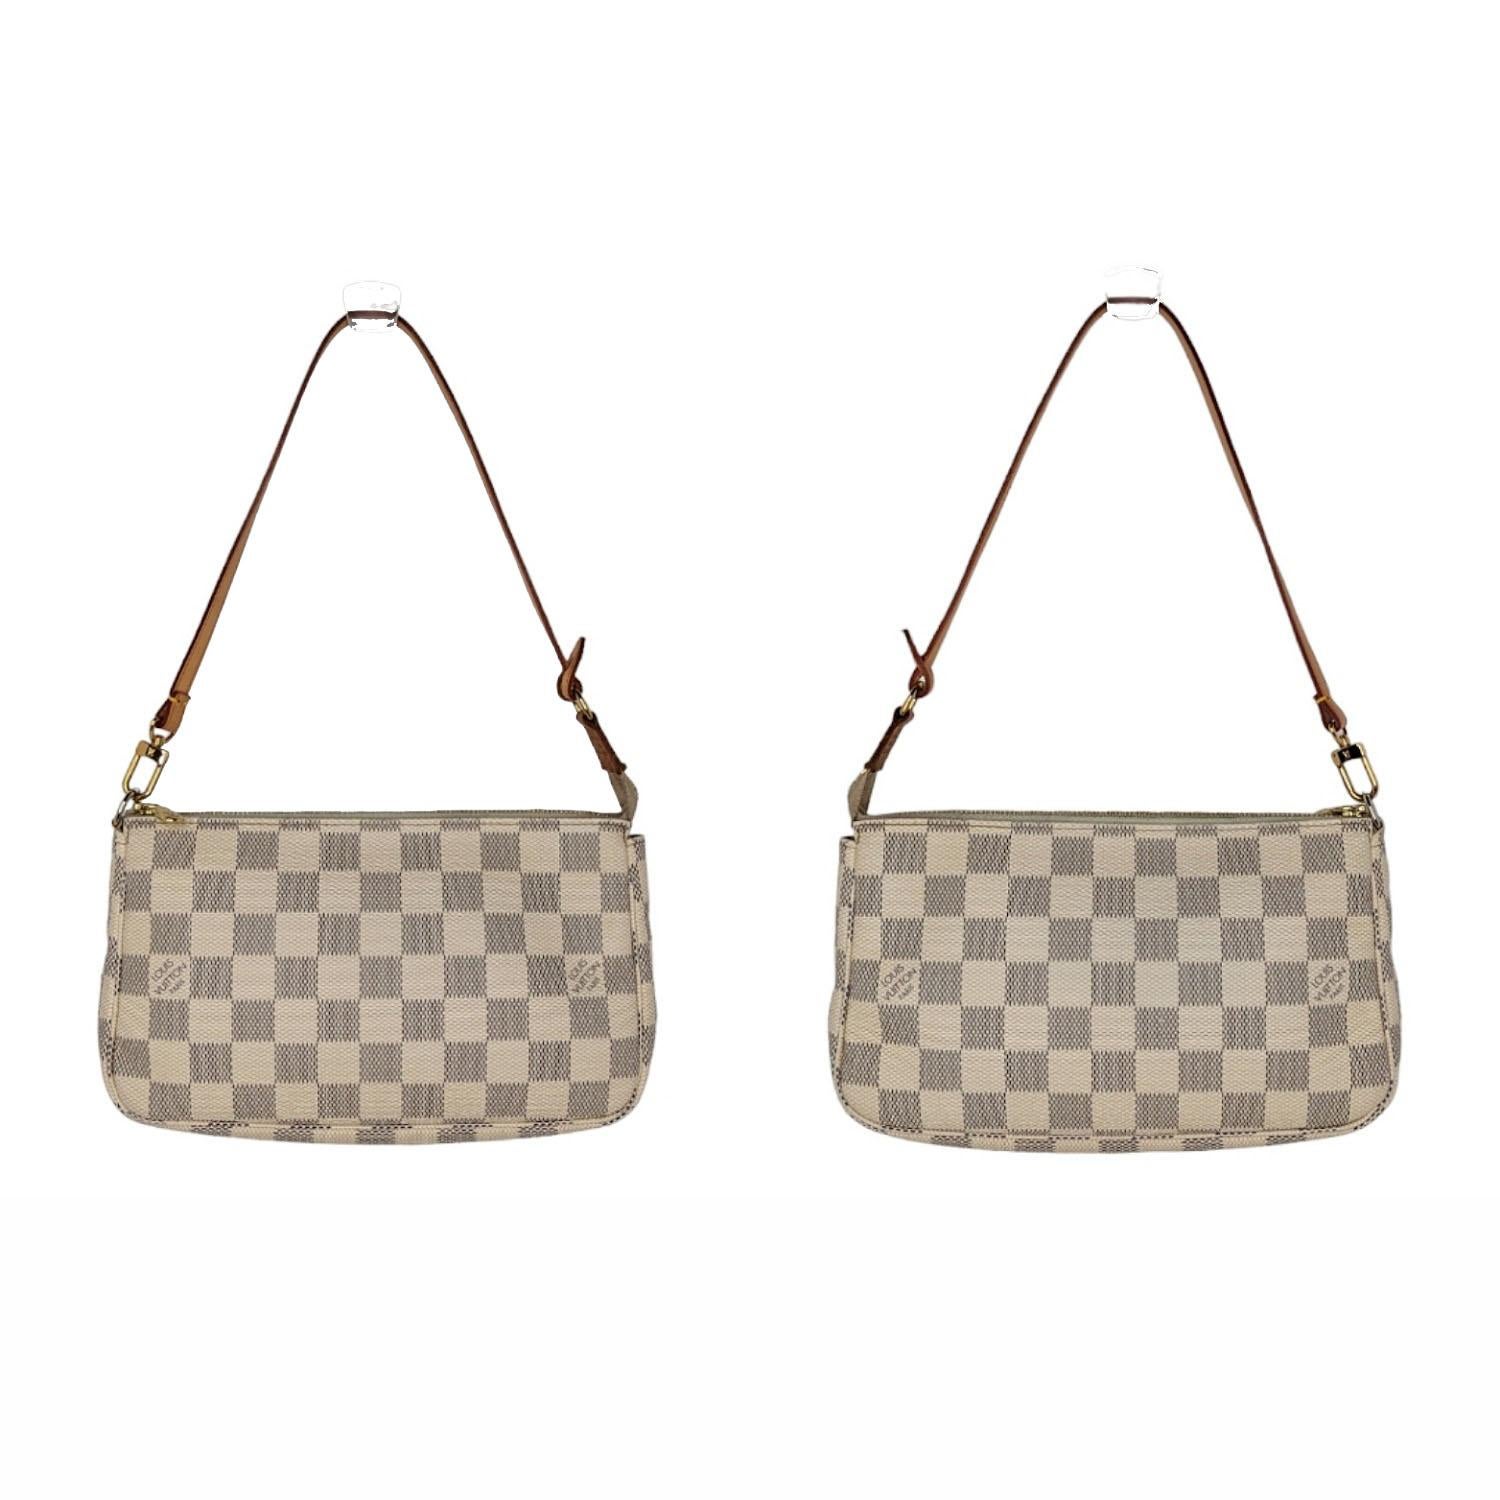 This pochette is crafted of Louis Vuitton's signature Damier canvas in blue and white. The bag features a vachetta leather strap and a brass top zipper that opens to a beige fabric interior. Retail $1,290.

Designer: Louis Vuitton
Material: Damier